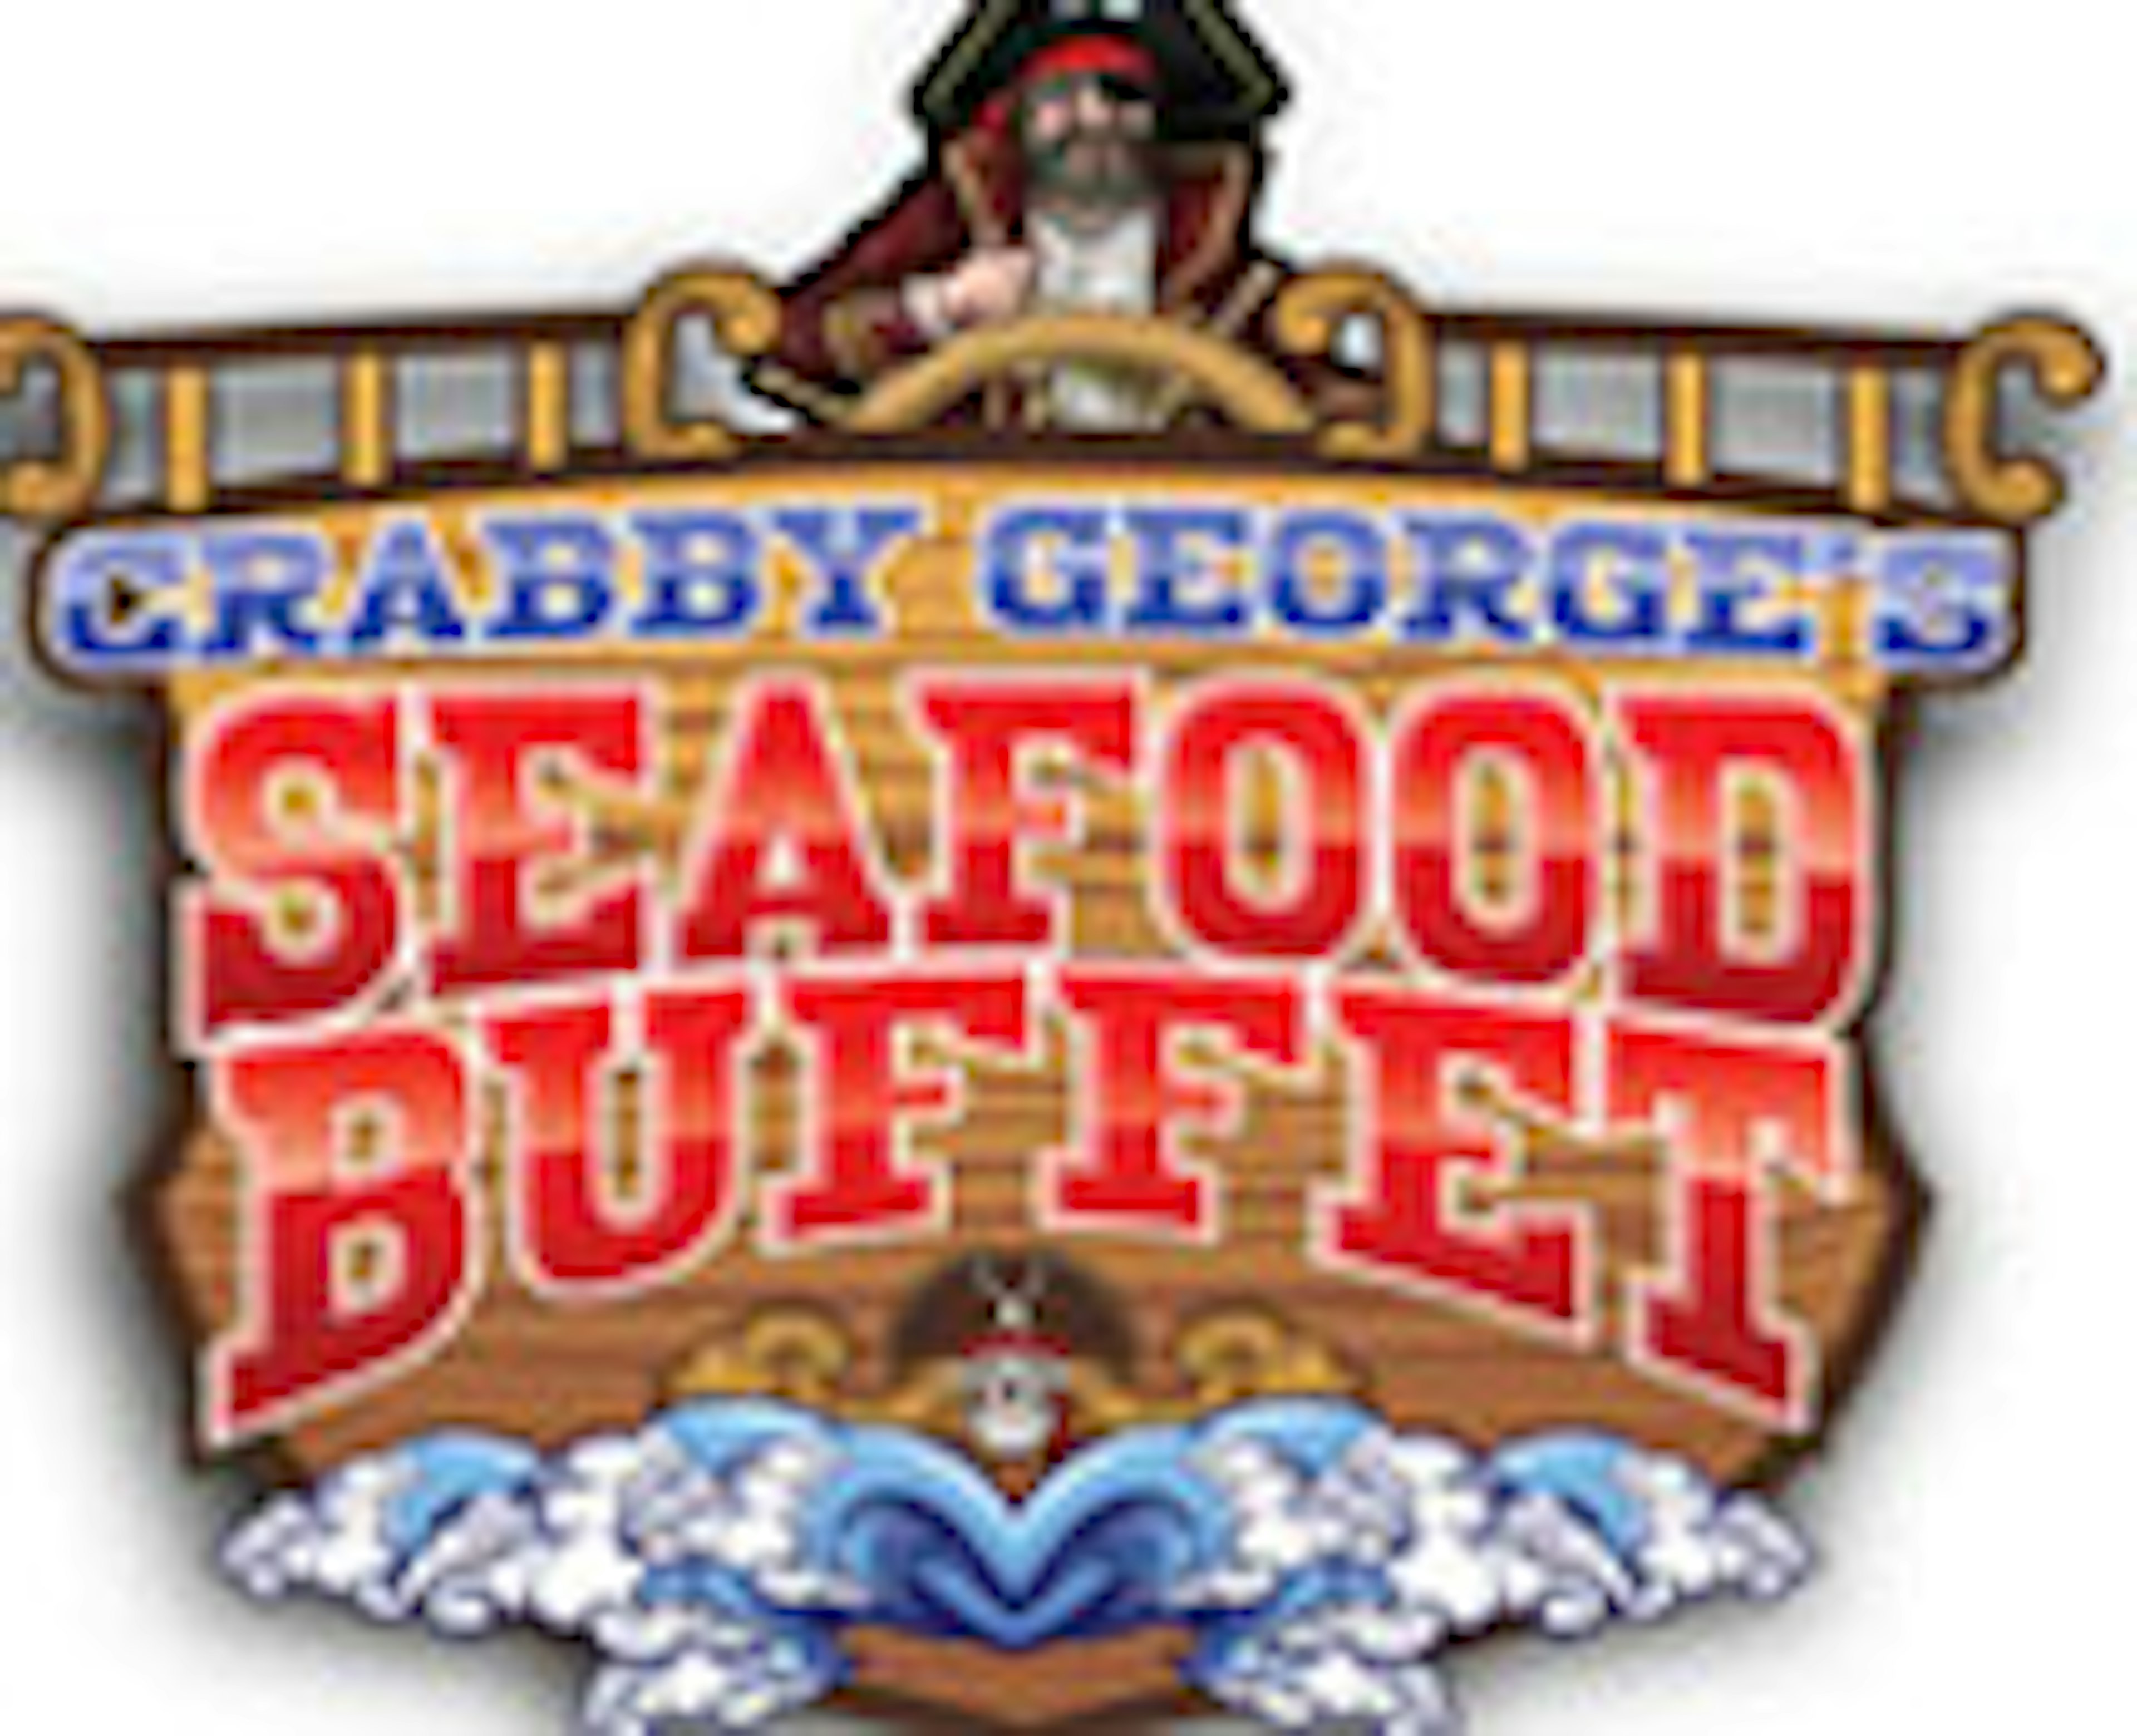 Crabby George’s Seafood Buffet